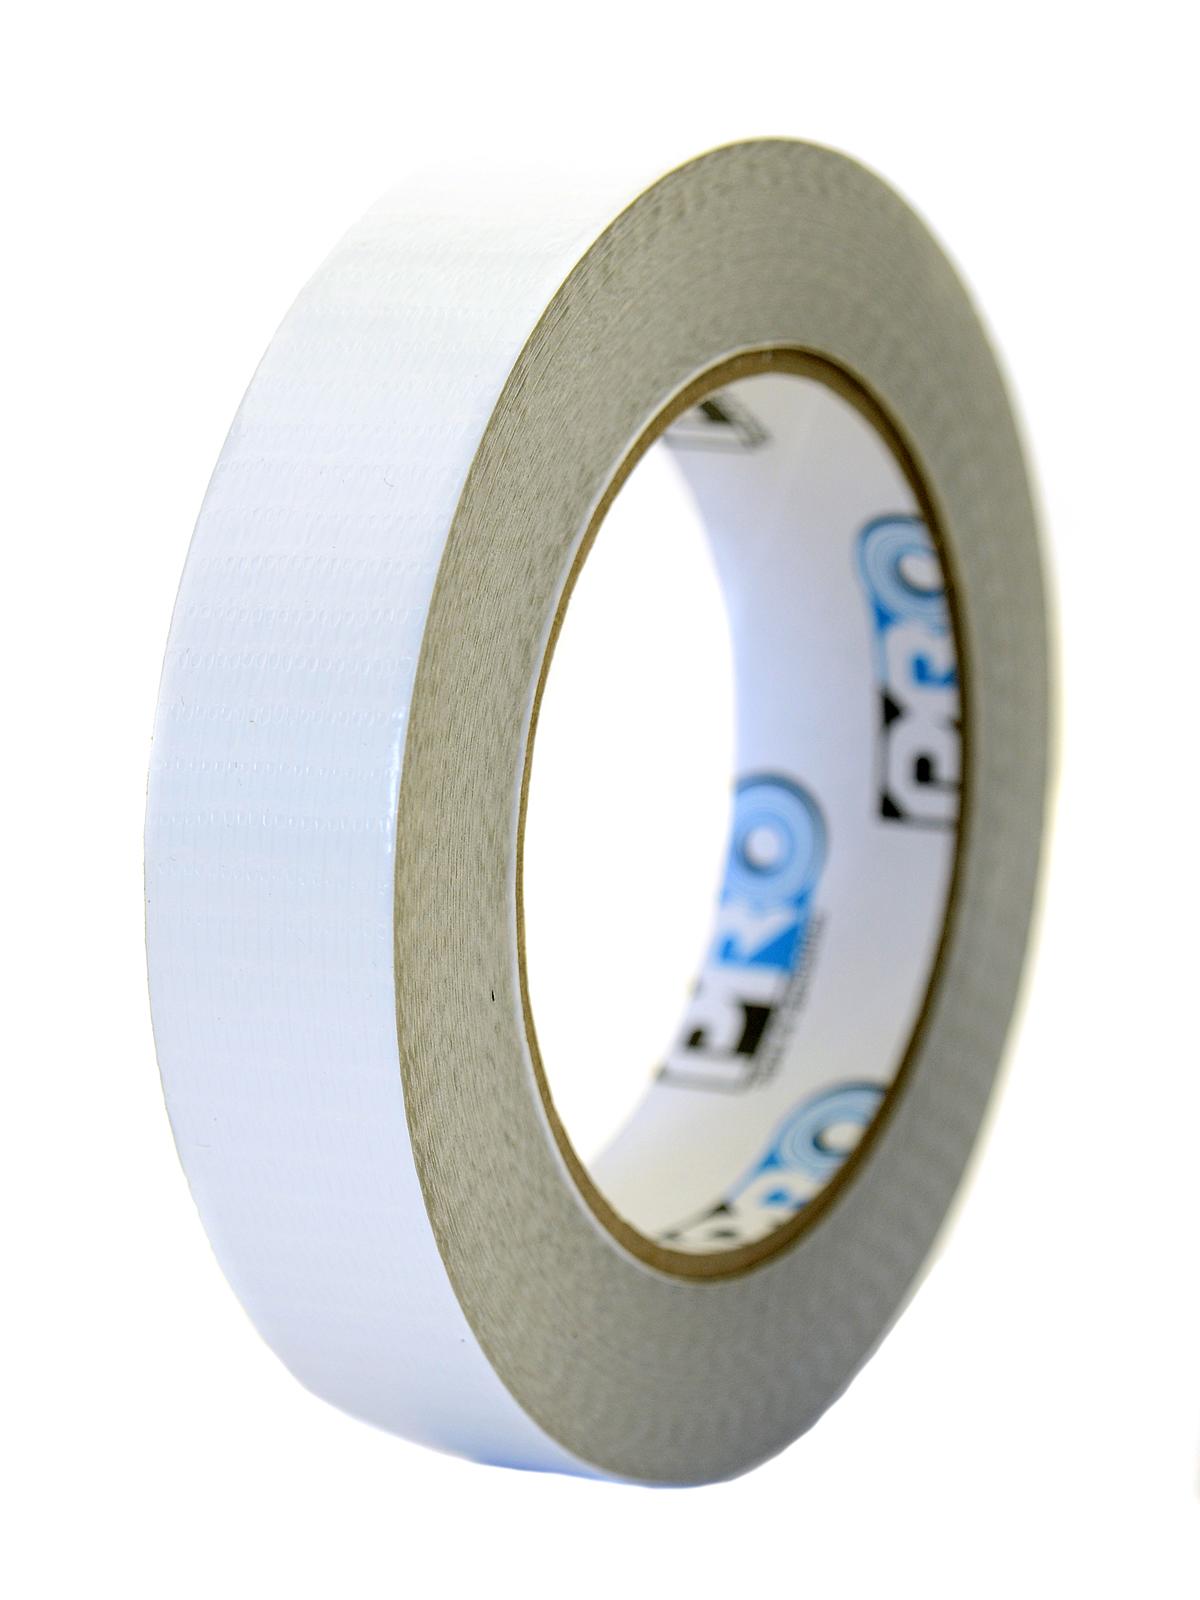 Pro-duct 110 Tape White